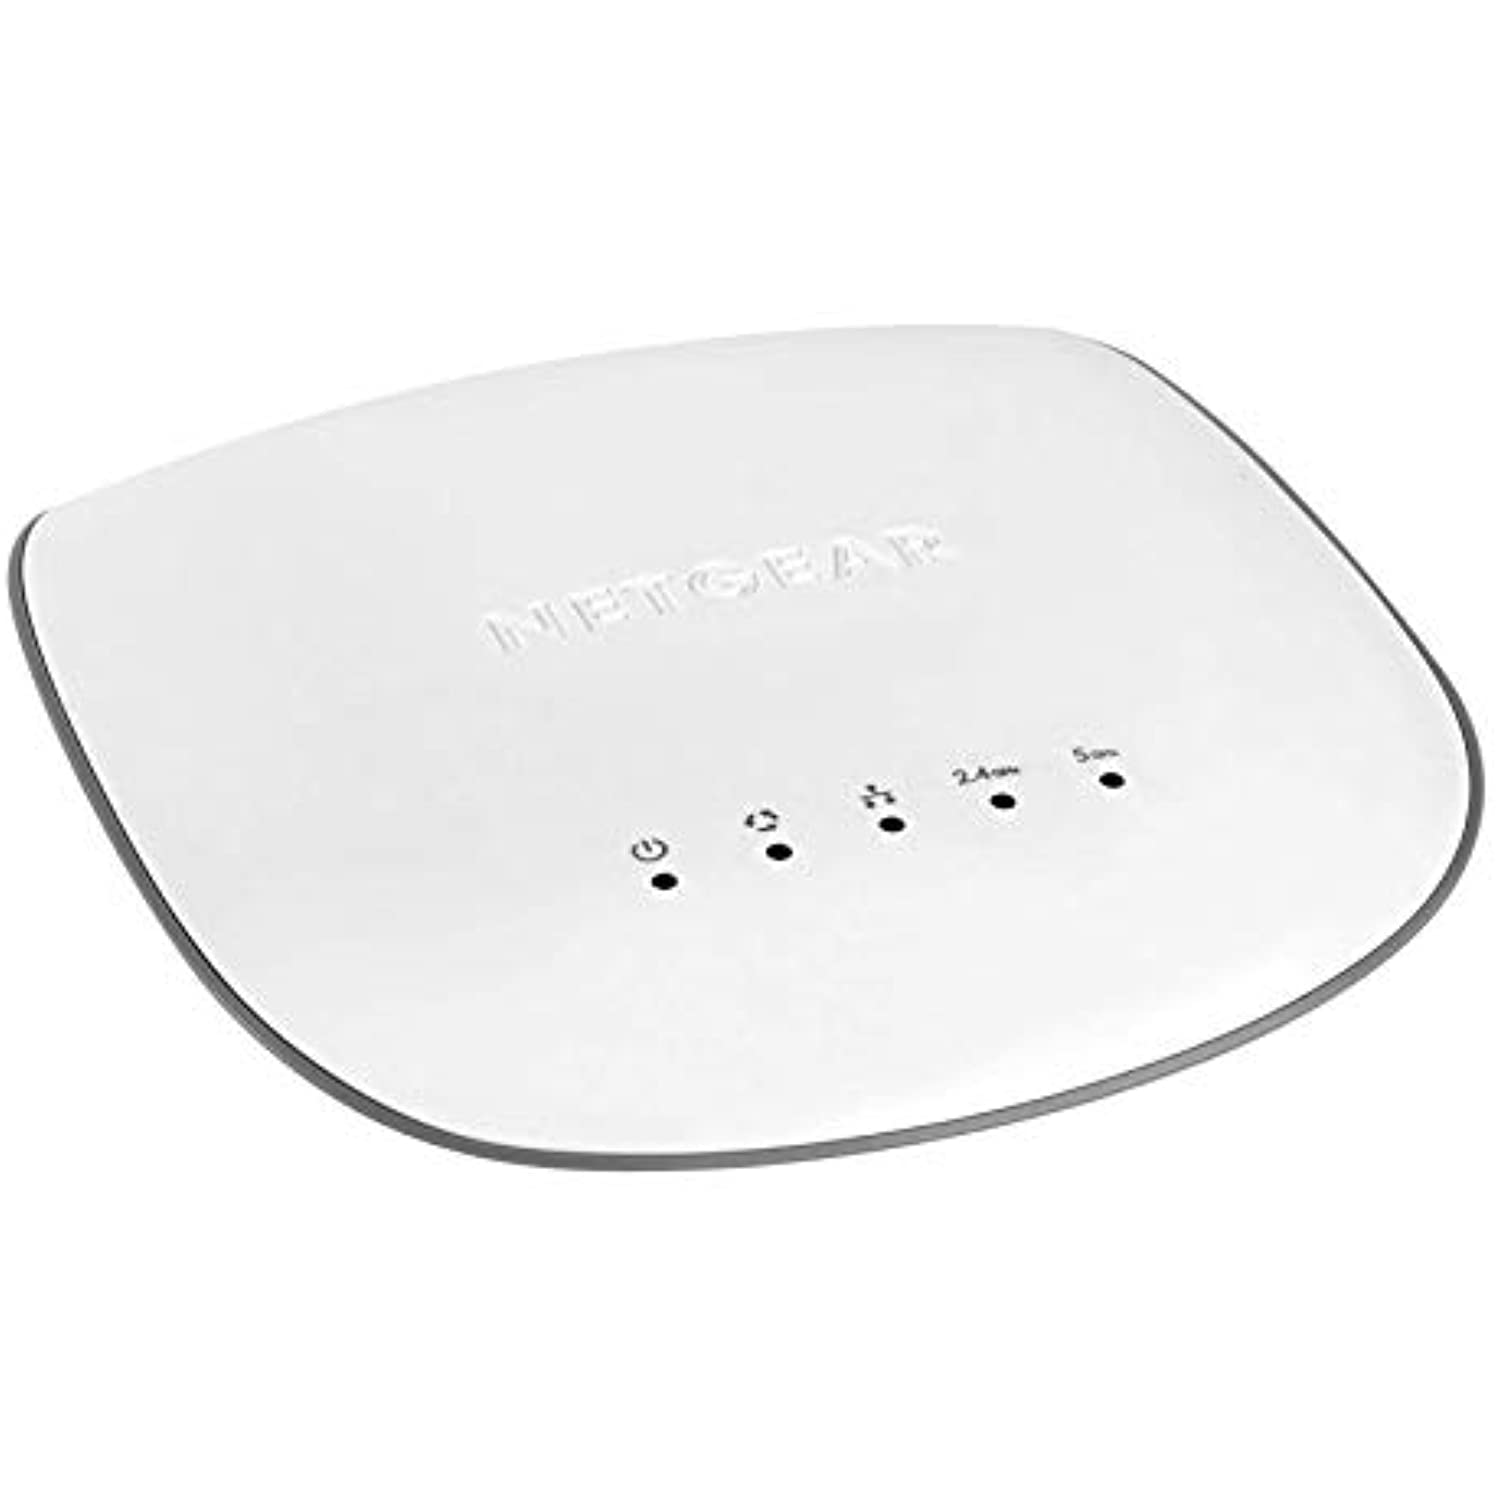 Point WiFi - Safety Access Insight Plus and NETGEAR Fire